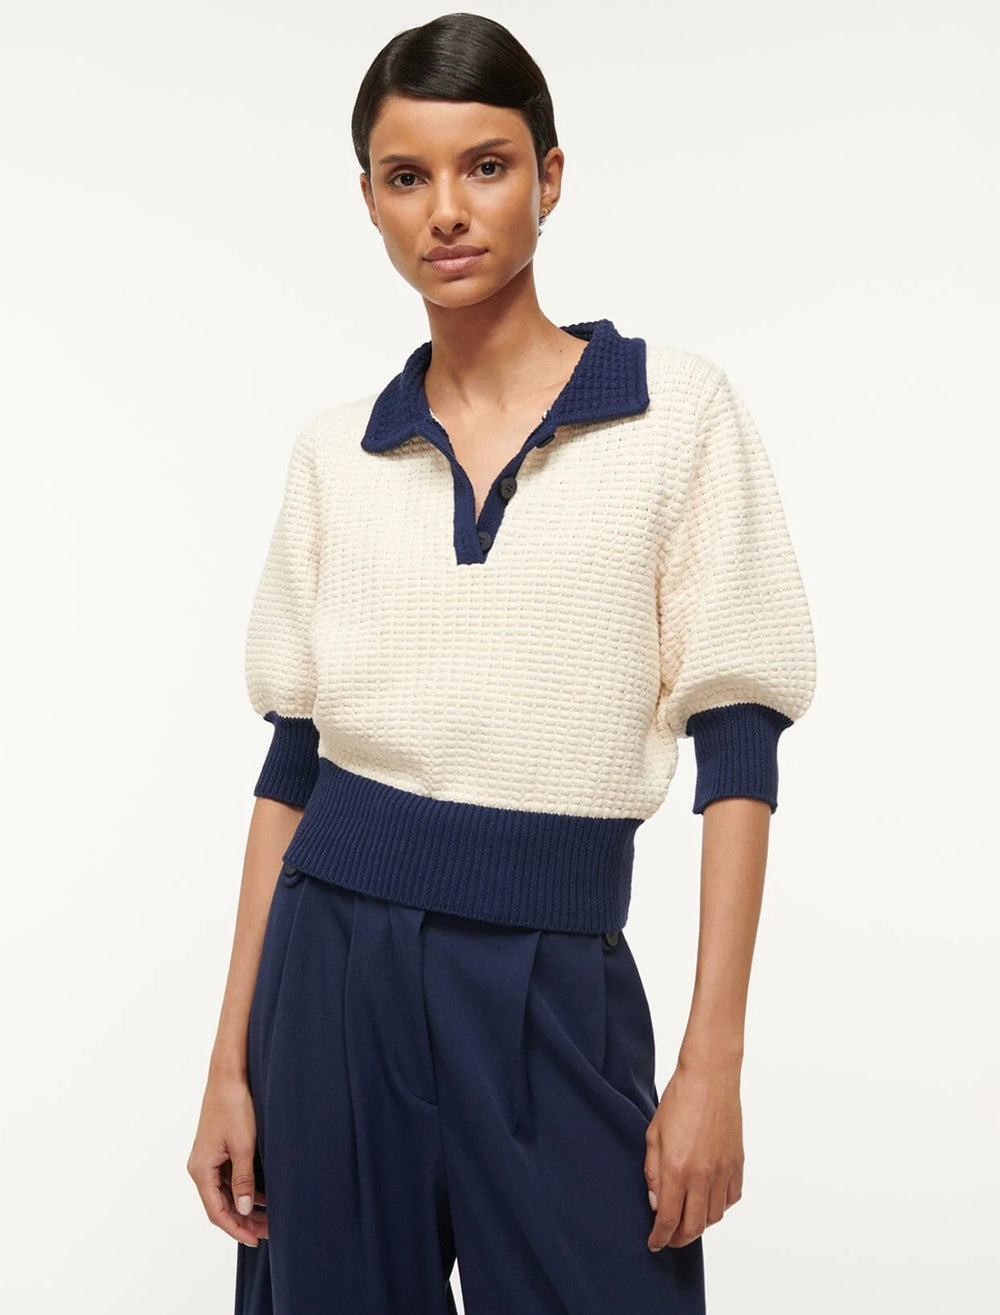 Model wearing Staud's altea sweater in ivory and navy.